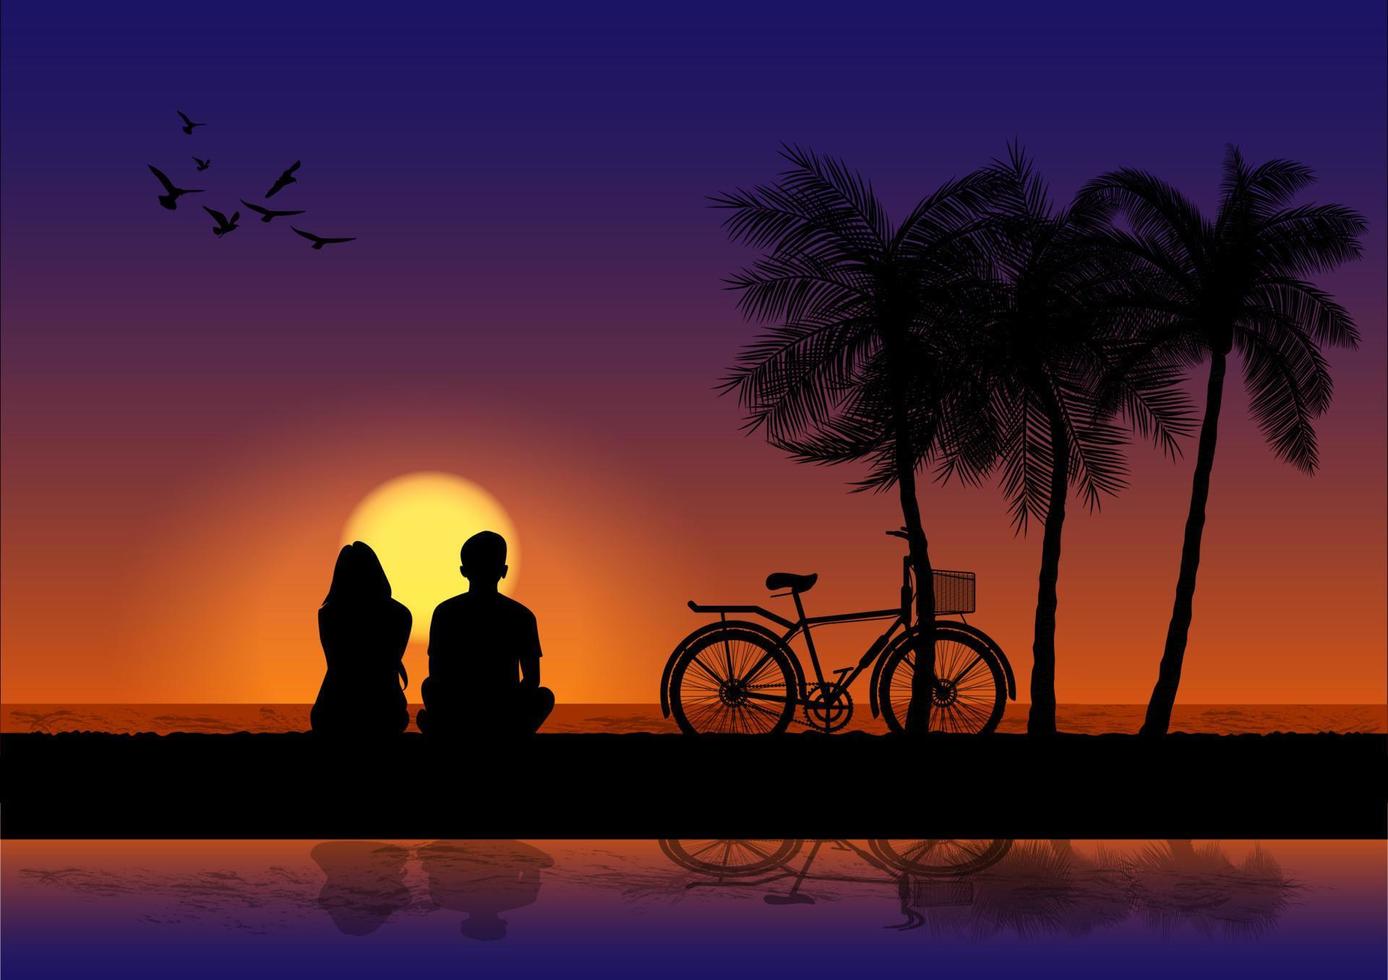 graphics image A couple man and women sitting look at sunset on the beach design vector illustration